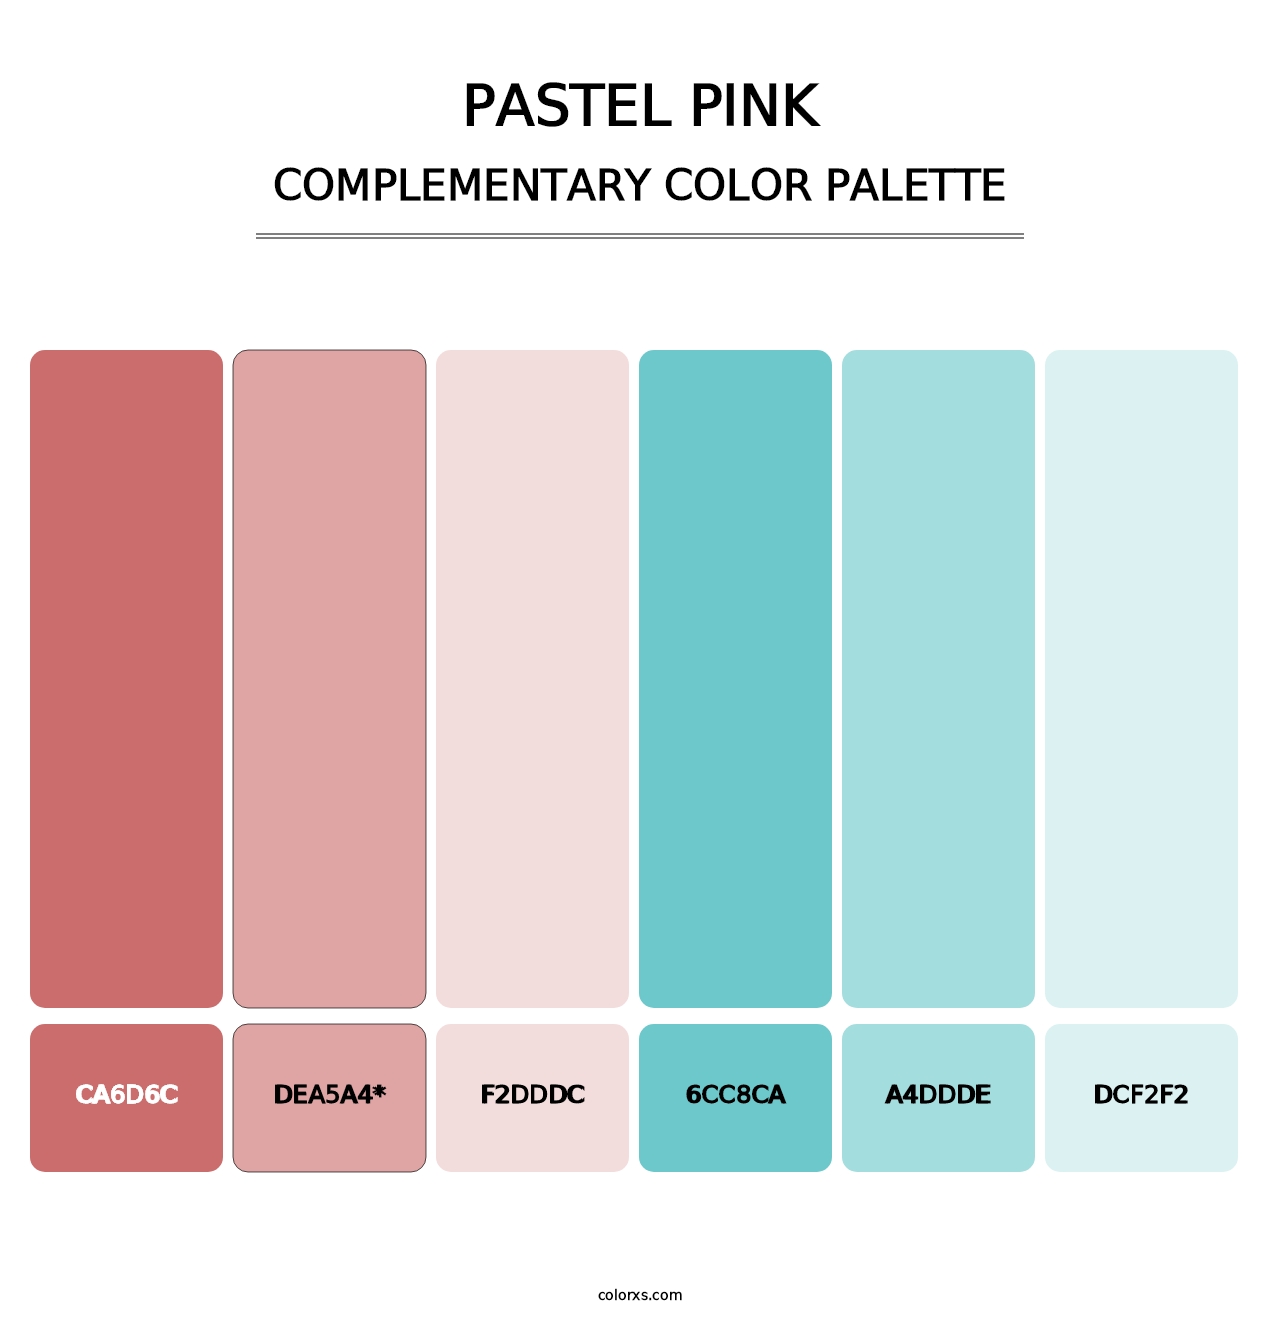 Pastel Pink - Complementary Color Palette